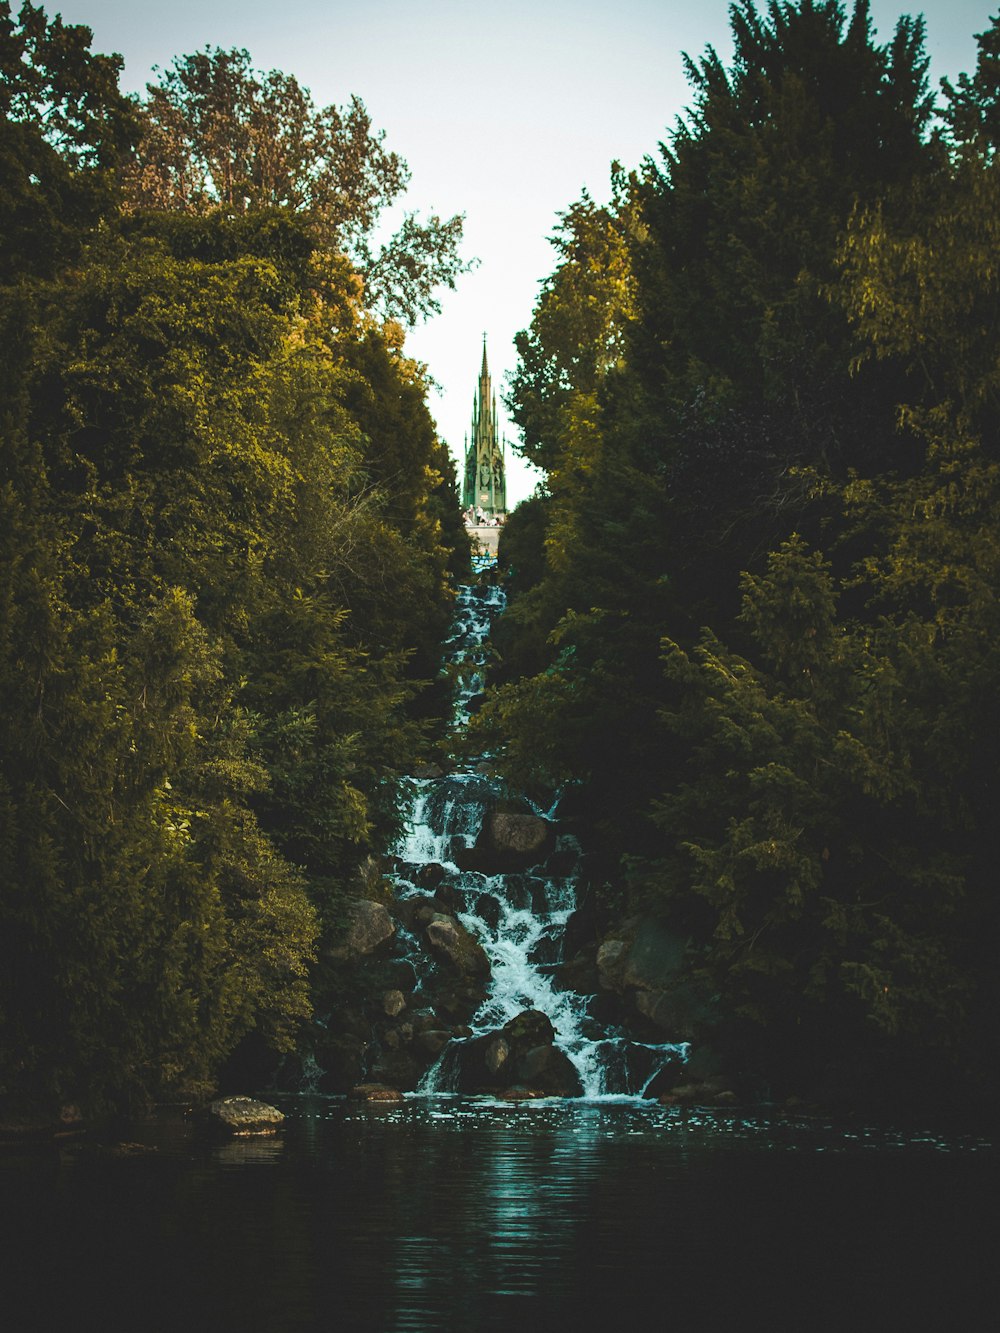 a waterfall in the middle of a forest with a church in the background